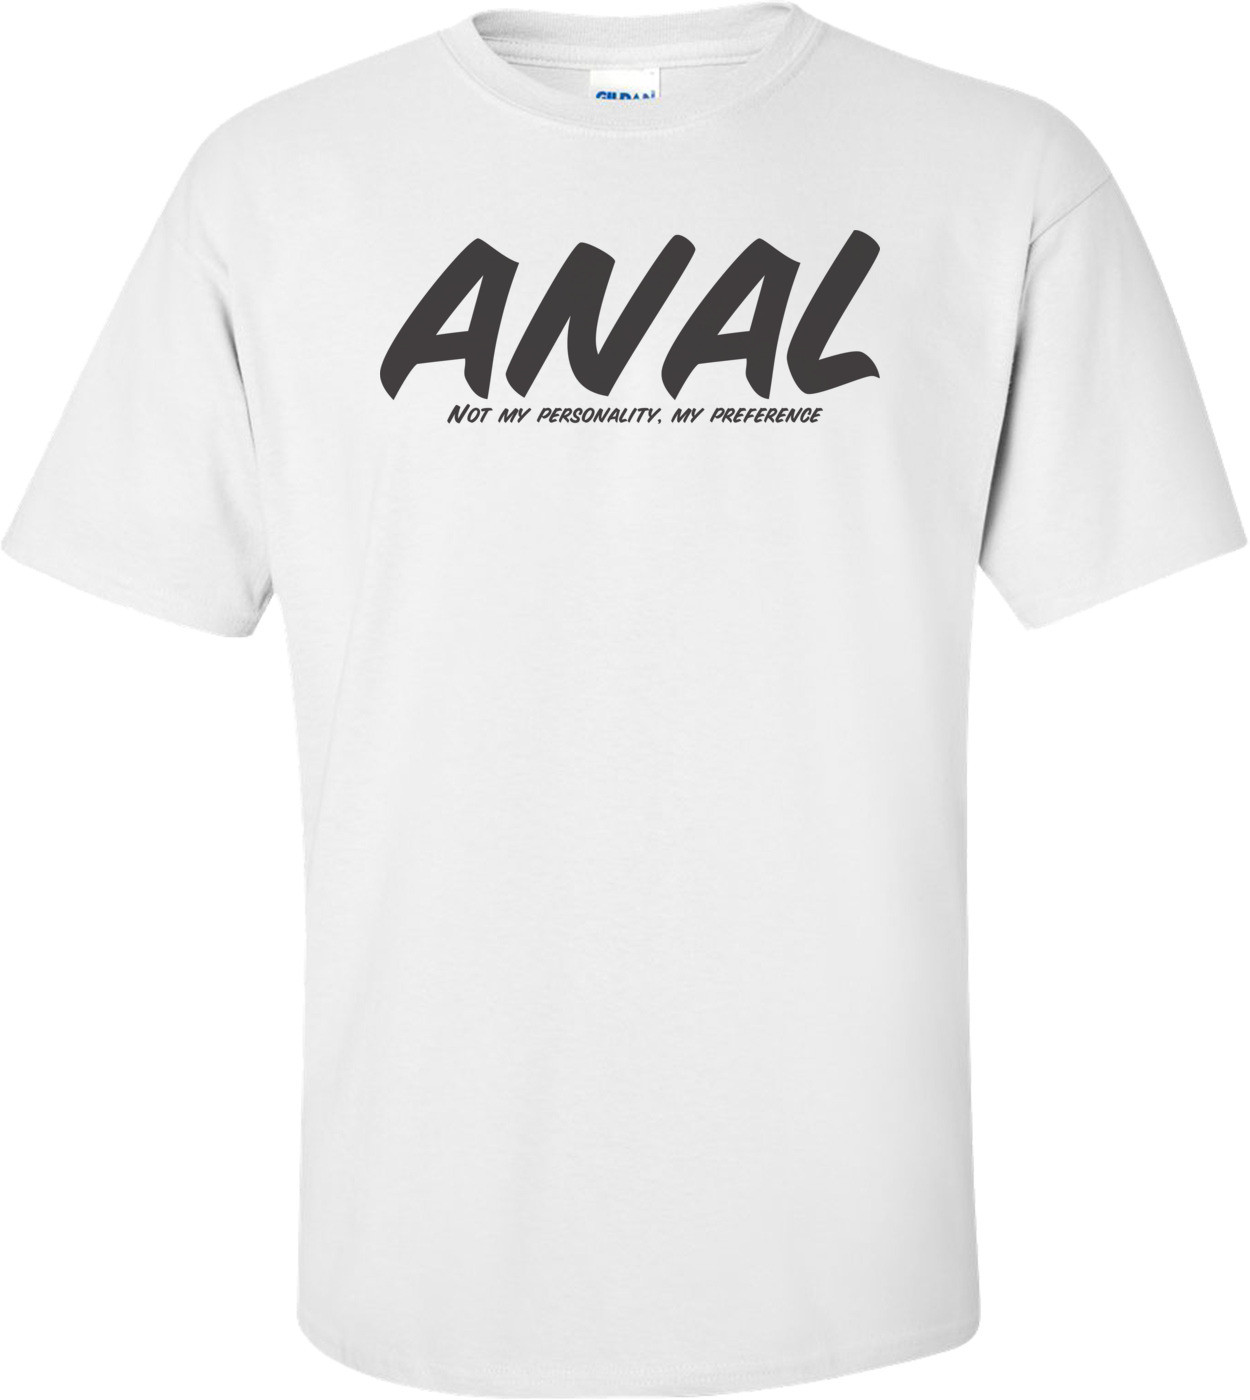 Anal Not My Personality, My Preference